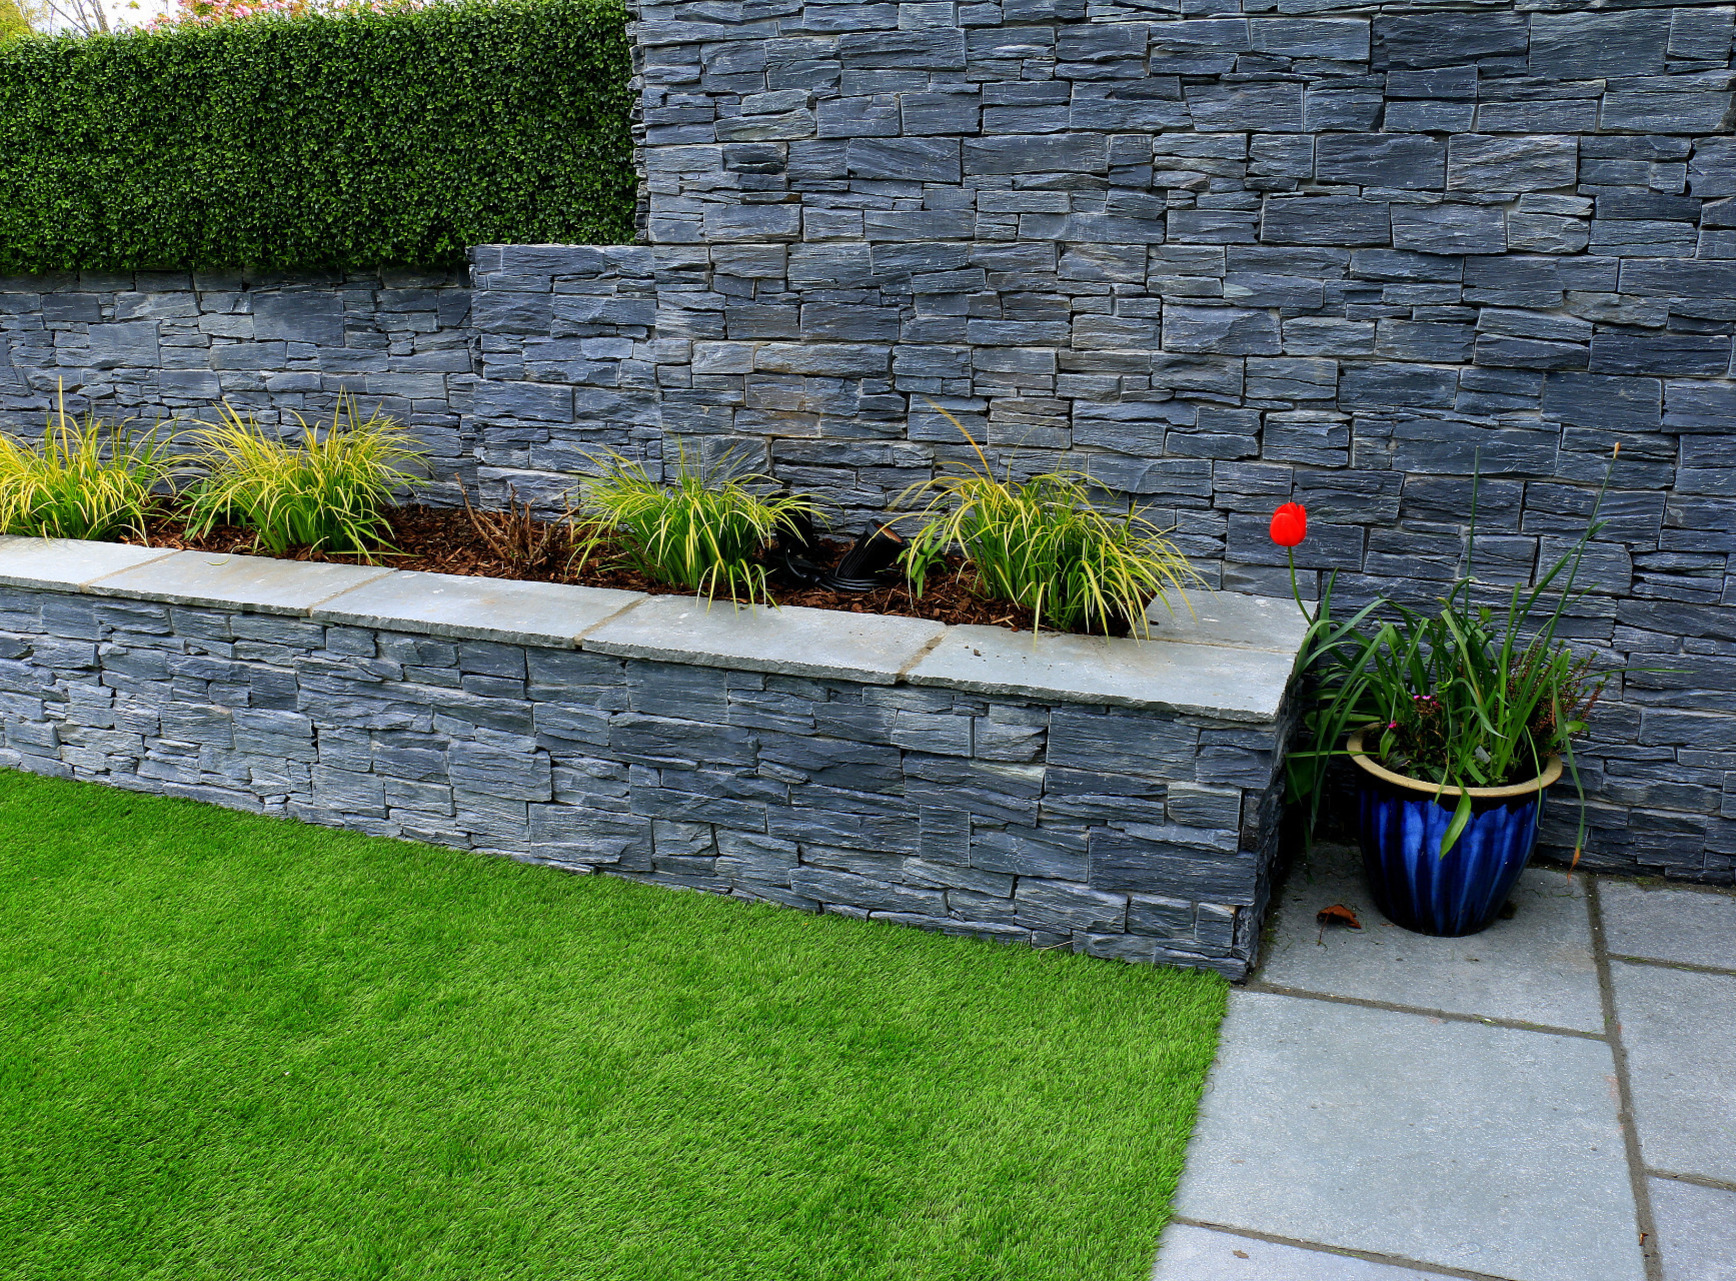 Stone Cladding & Boxwood Cladding - resilient and cost-effective enhanced garden walls